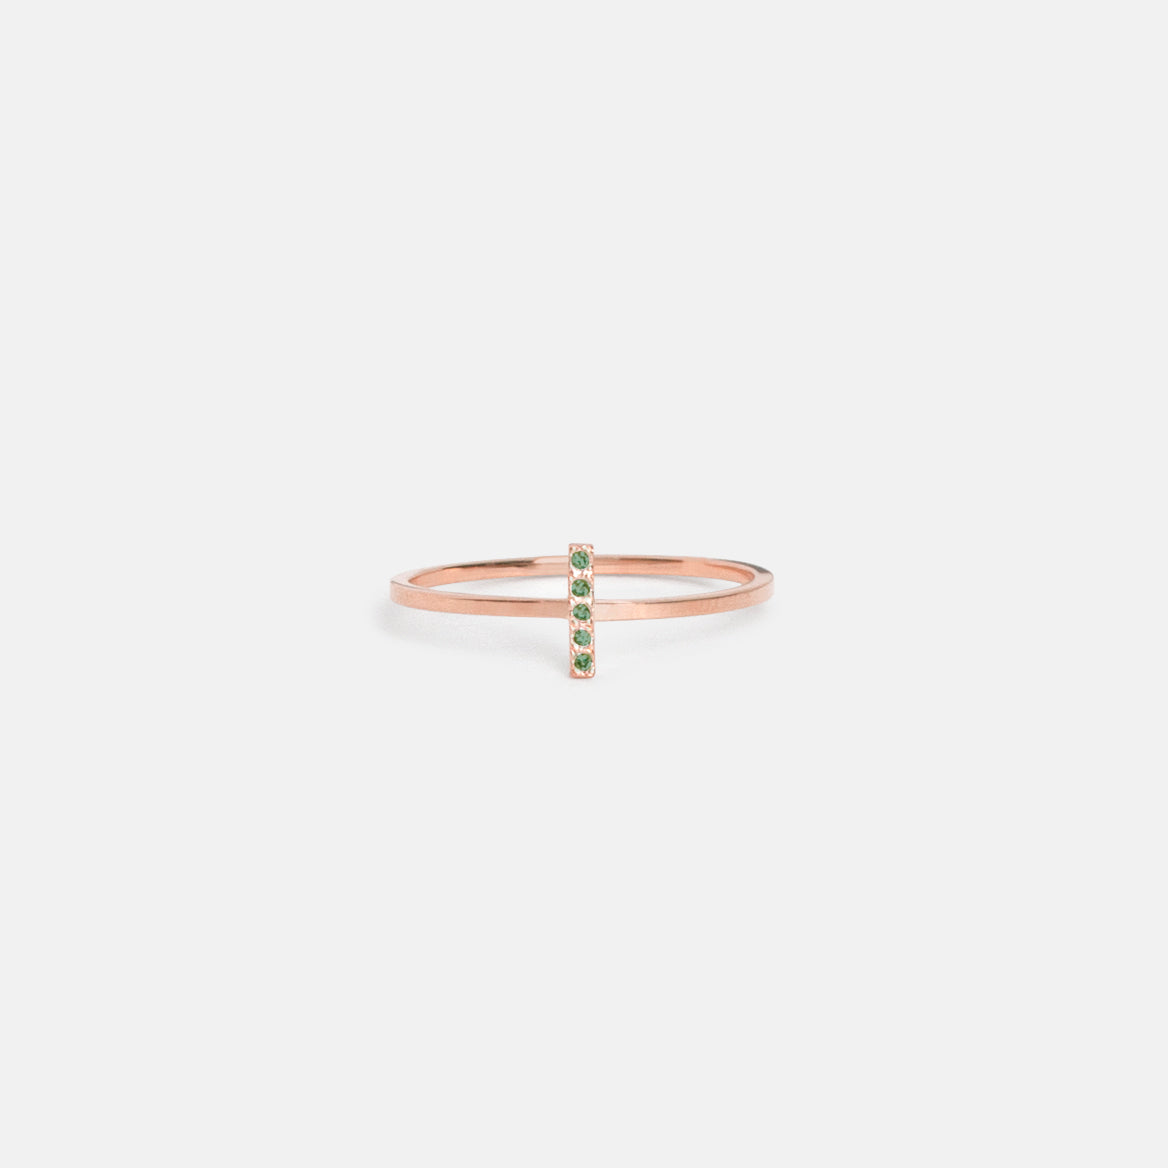 Stevi Minimalist Ring in 14k Rose Gold set with Emeralds by SHW Fine Jewelry